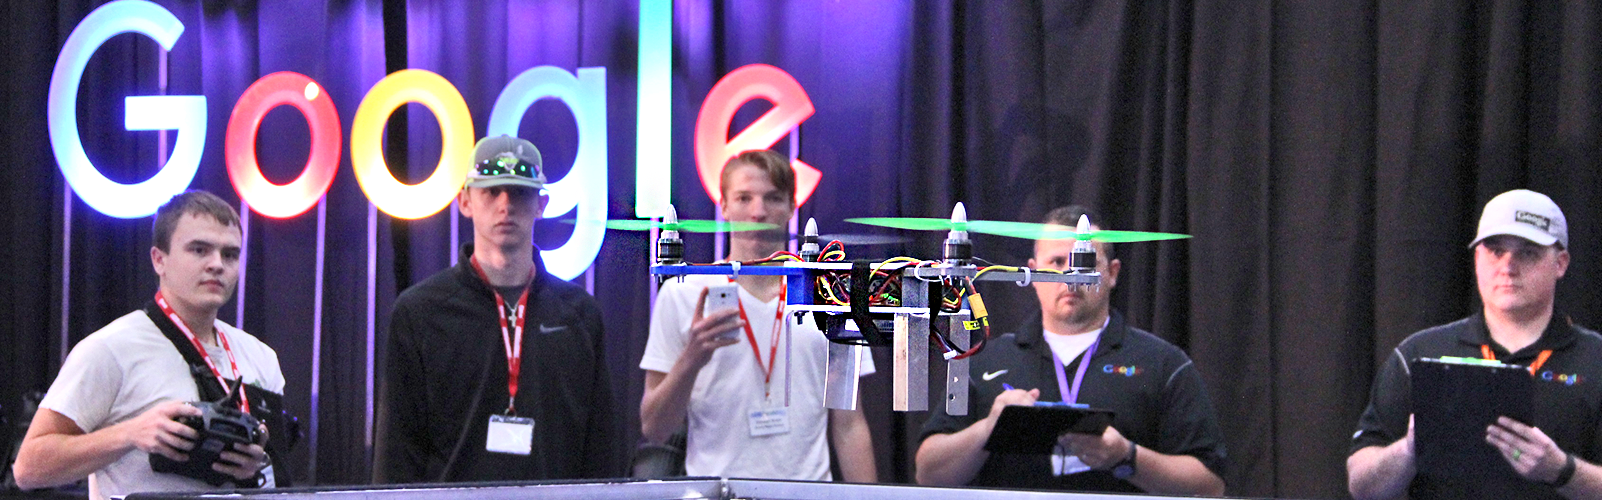 Boy flying drone with team and judges watching